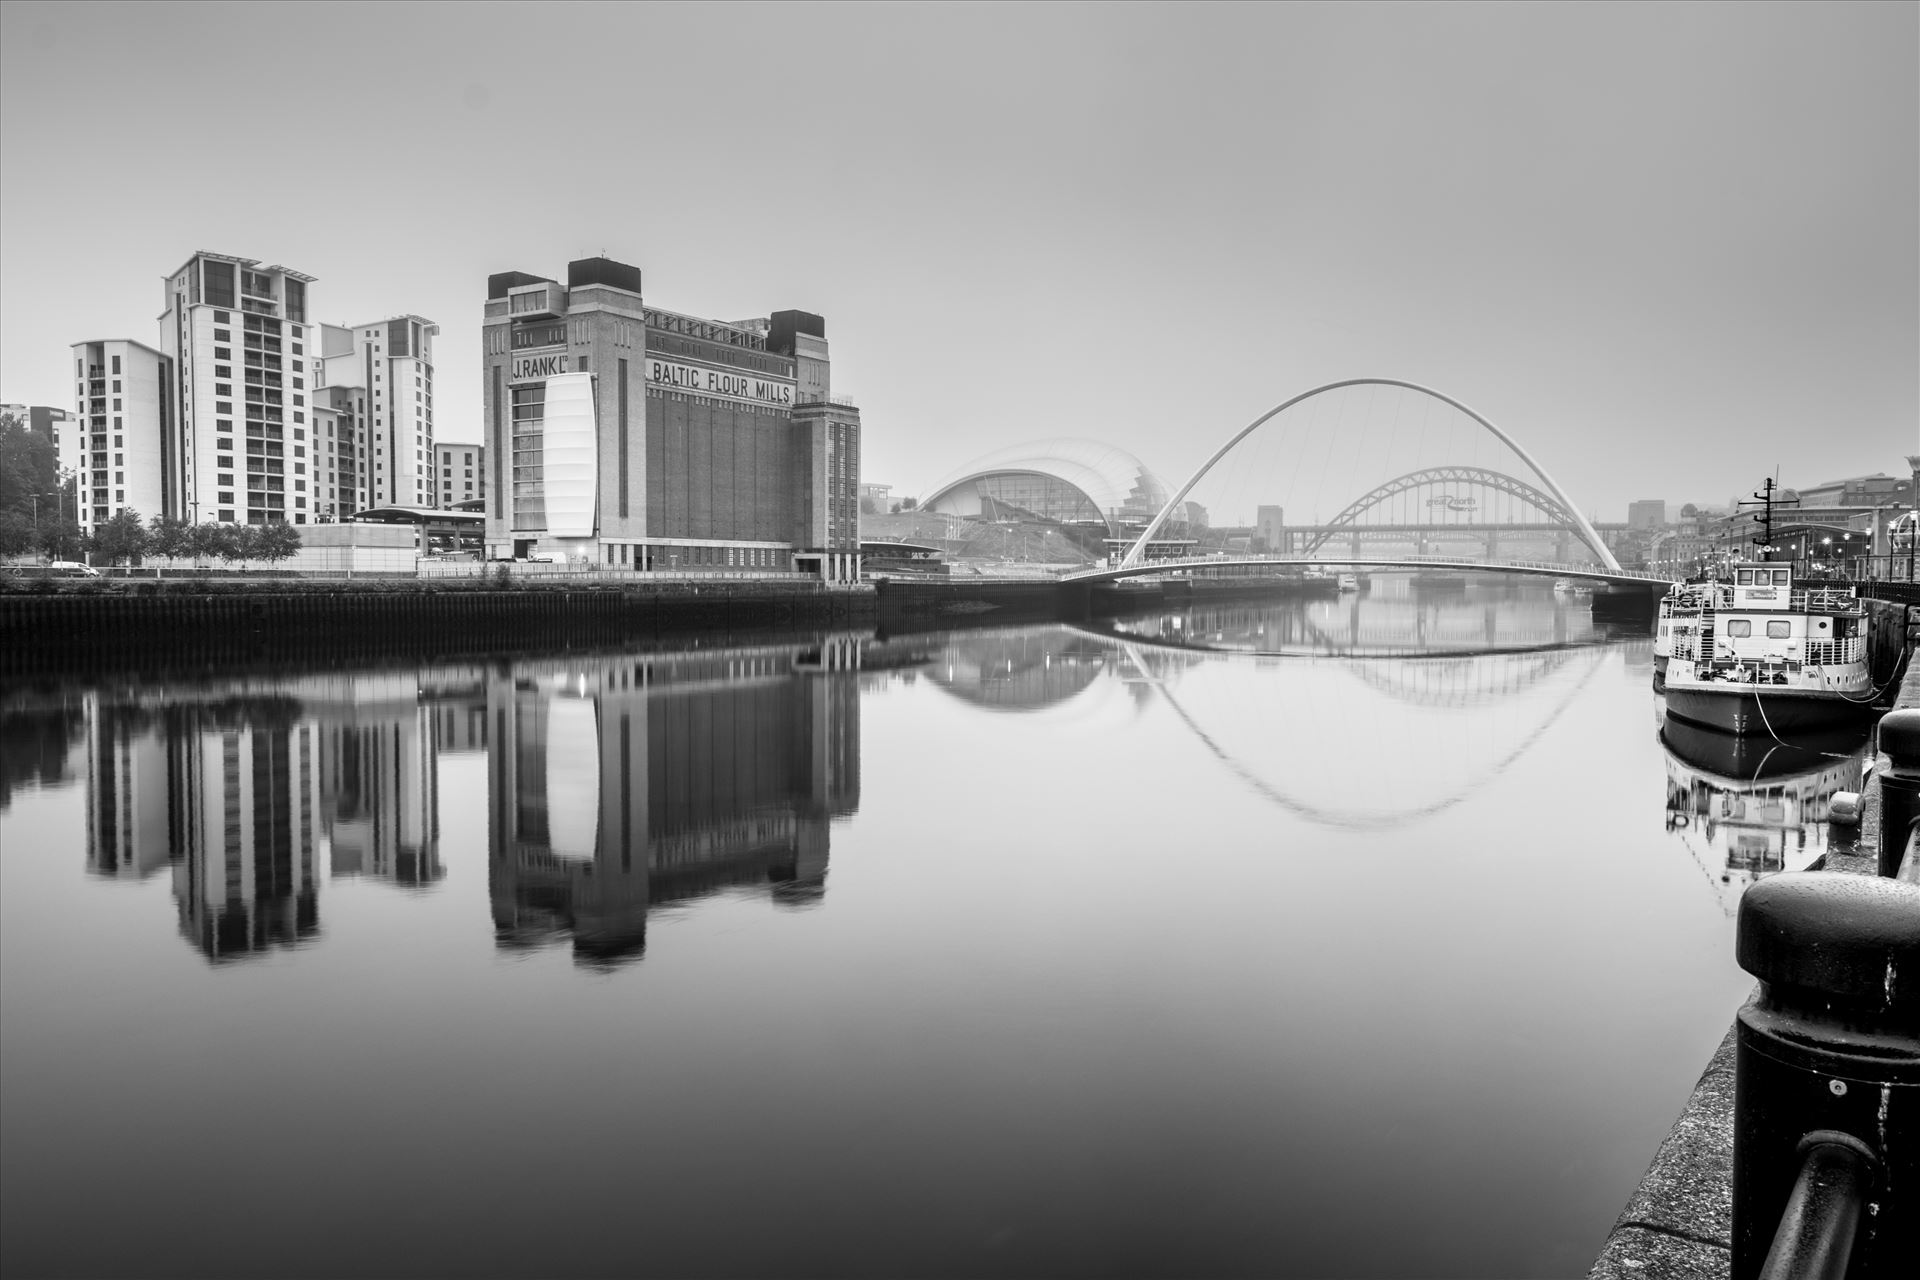 Newcastle/Gateshead Quayside The Baltic Arts centre on the banks of the River Tyne by philreay